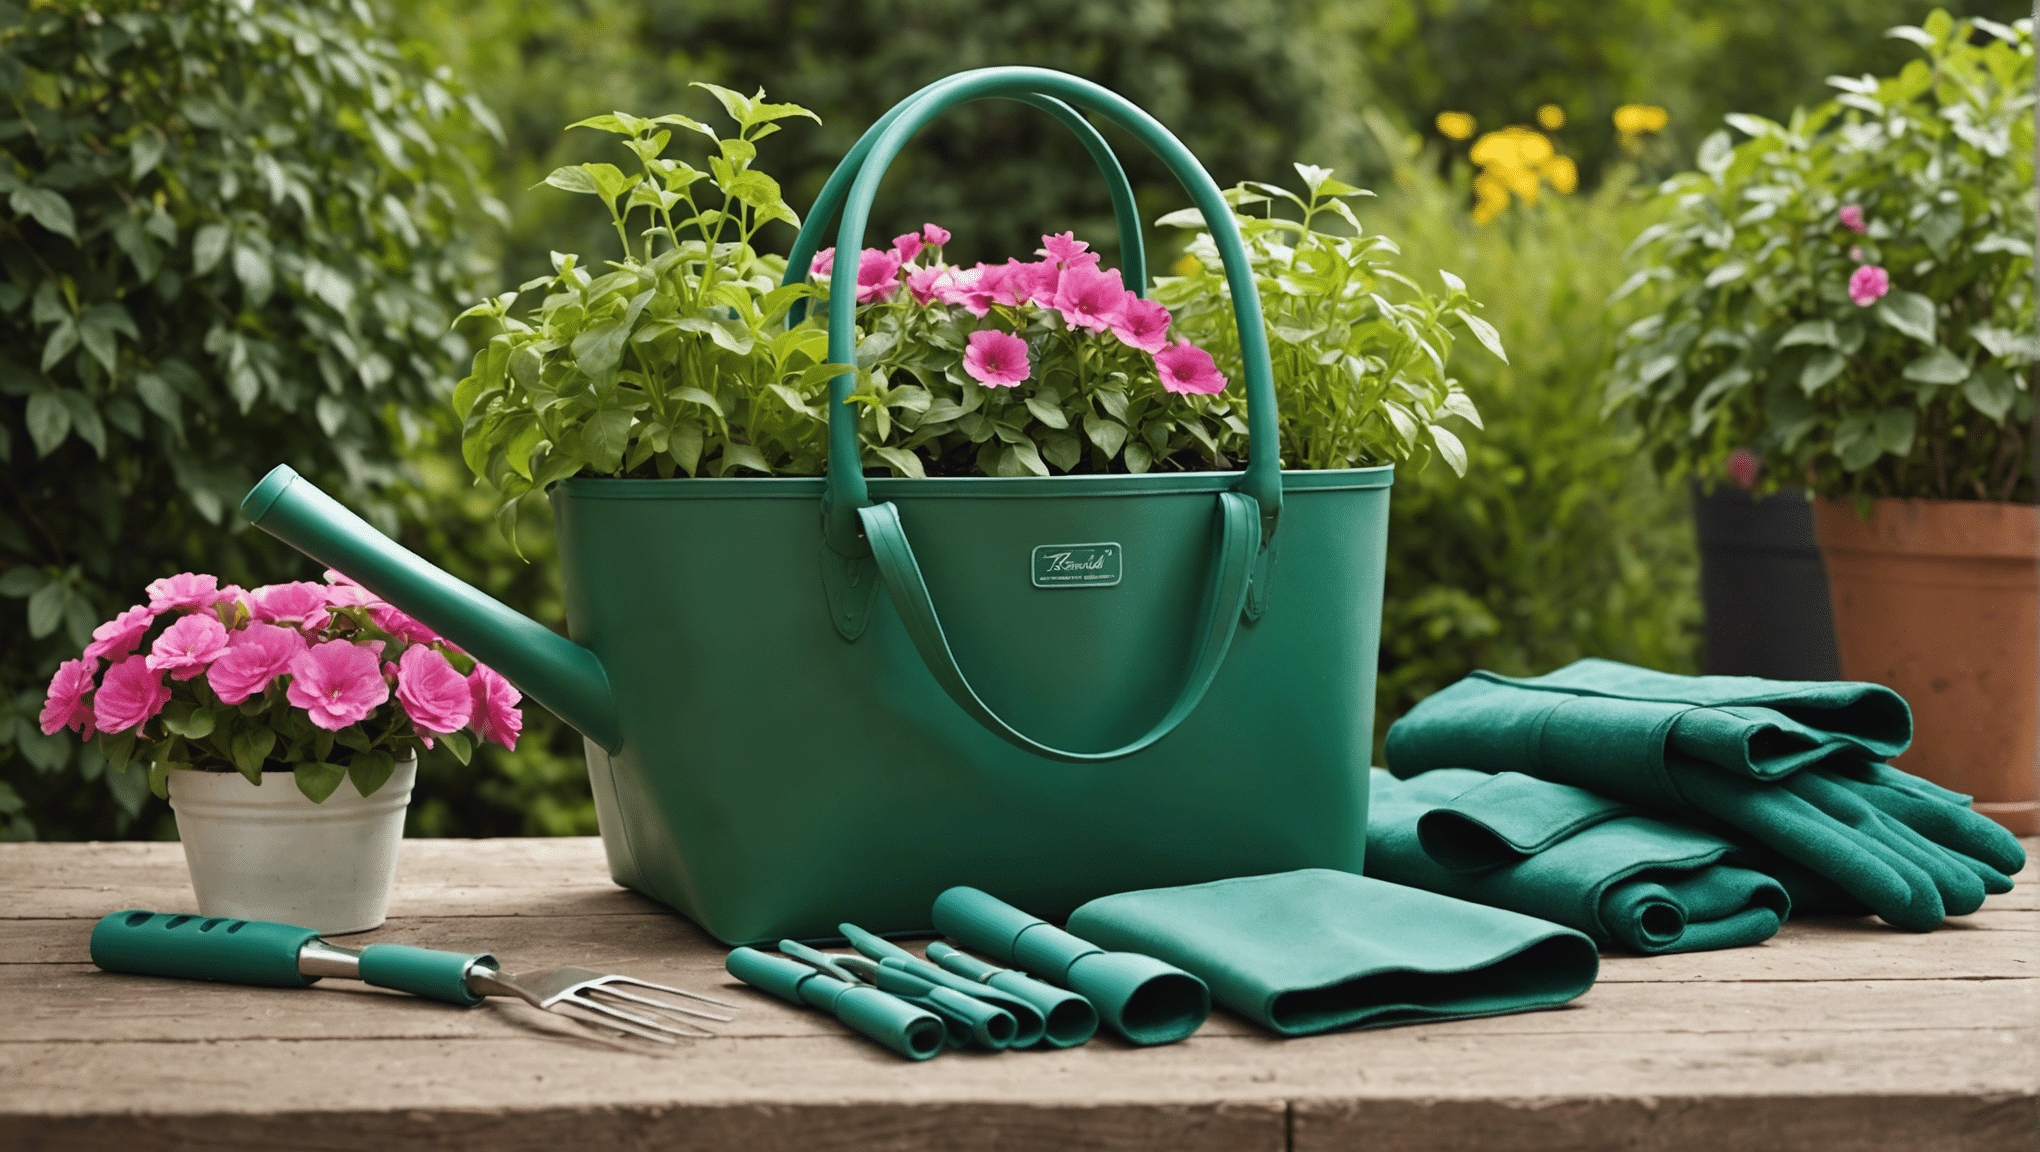 find out the must-have features of a gardening tote to carry all your tools and supplies with ease and convenience.